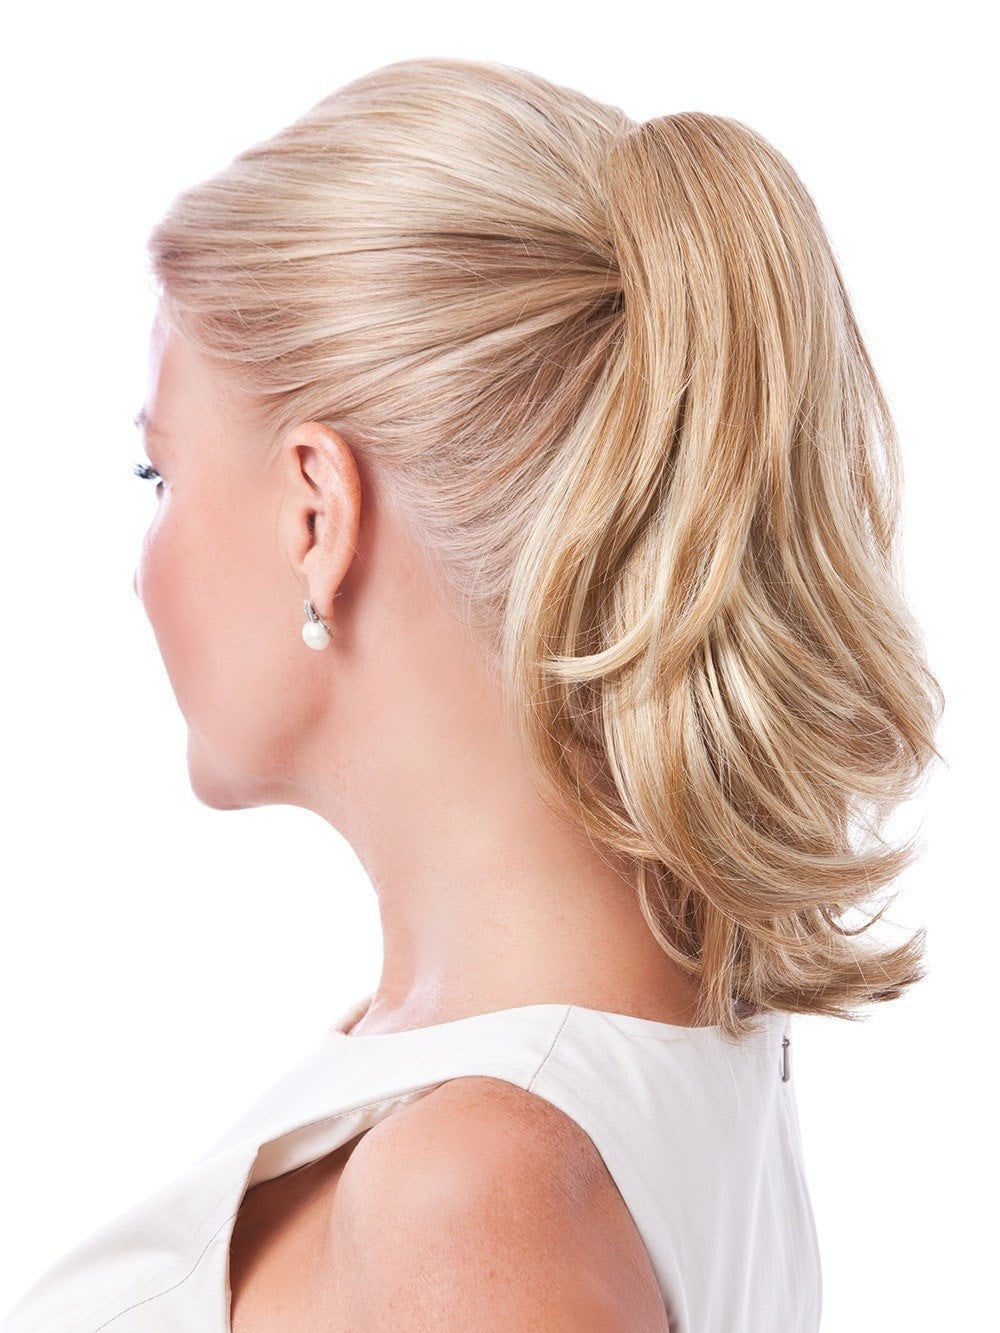 Wear it high or low for a completely different hairstyle